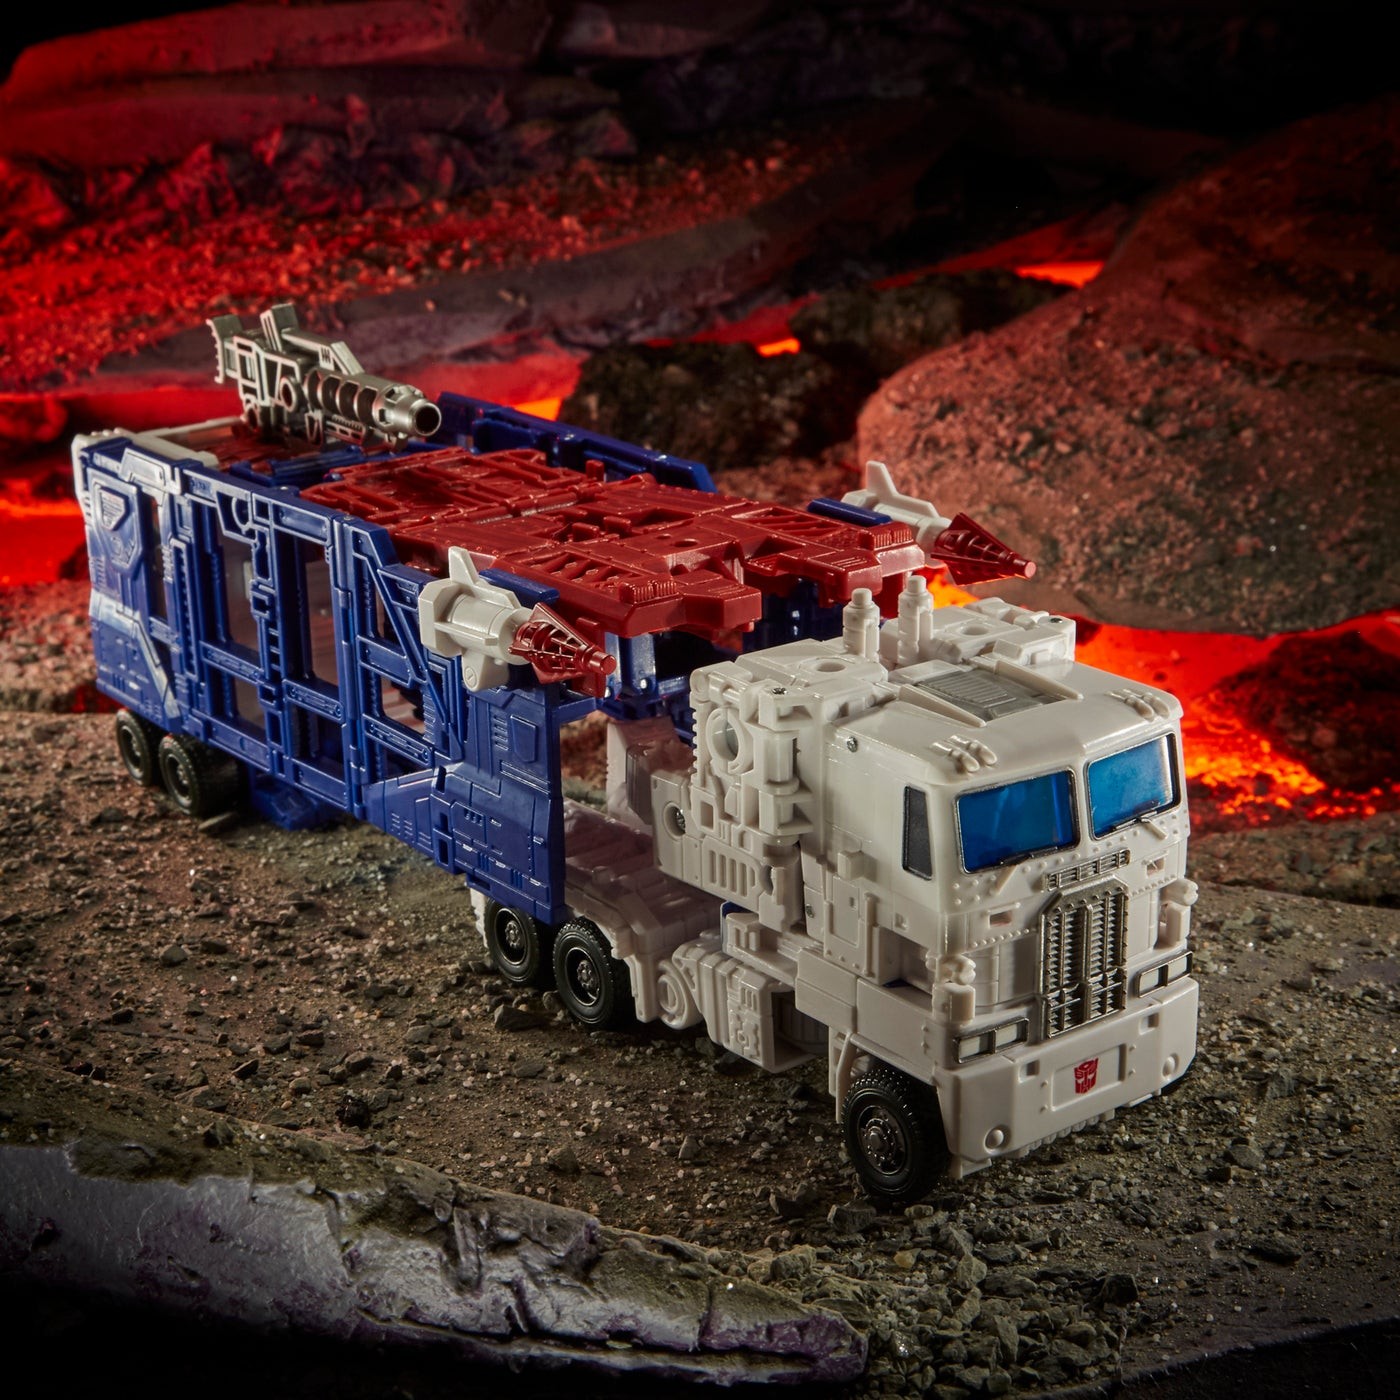 Transformers News: Kingdom Dinobot, Airazor and Ultra Magnus officially revealed